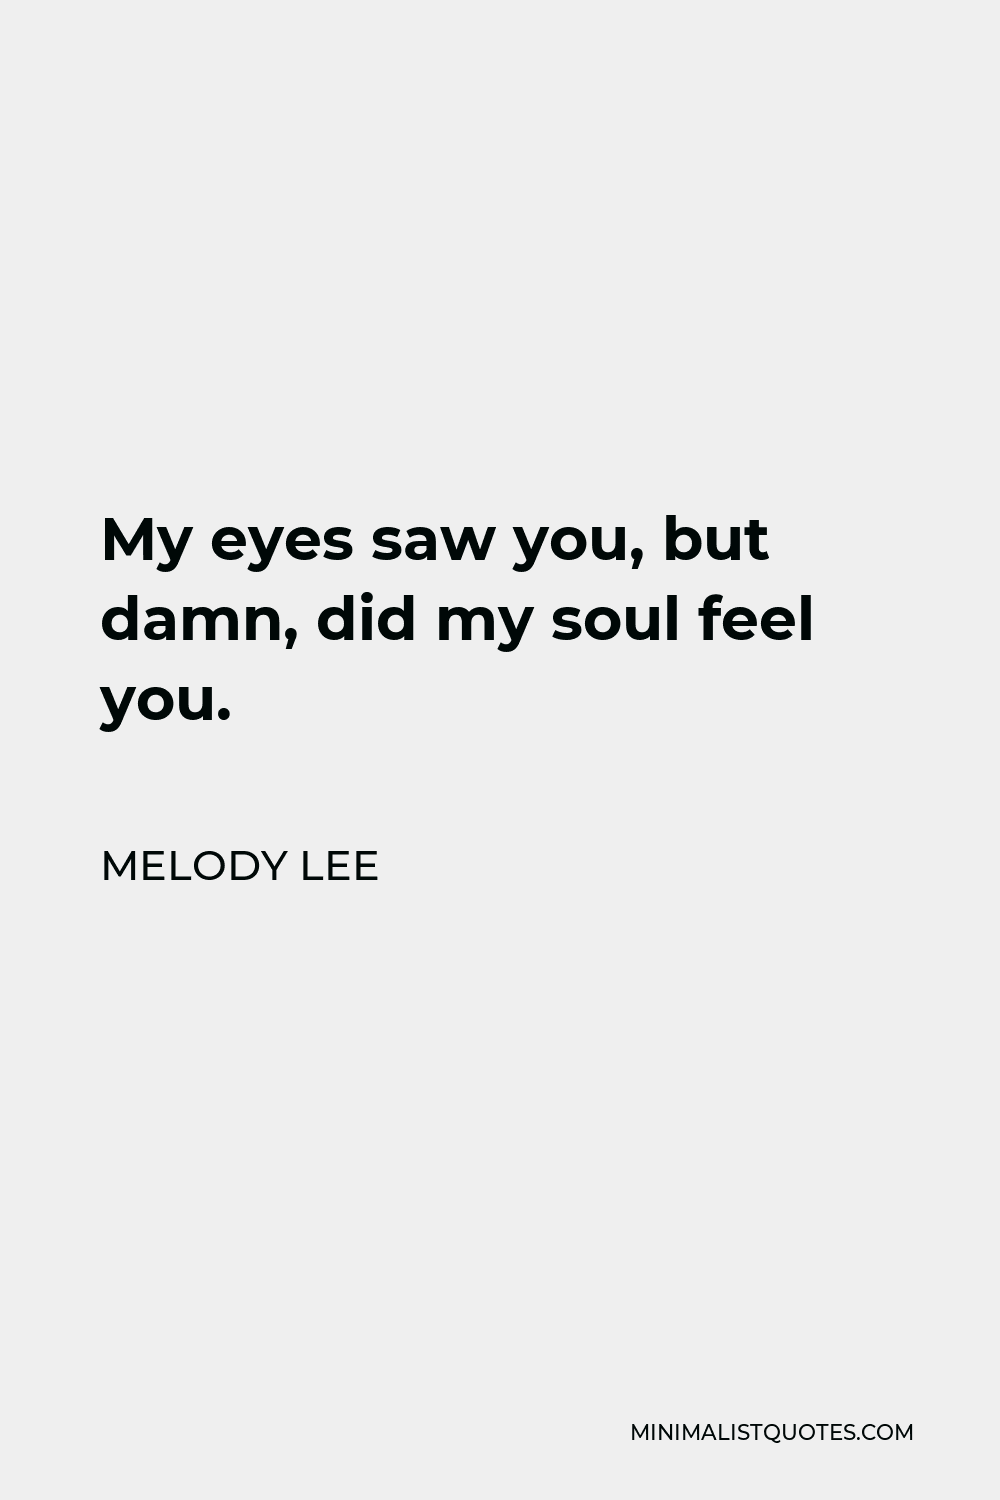 Melody Lee Quote: My eyes saw you, but damn, did my soul feel you.